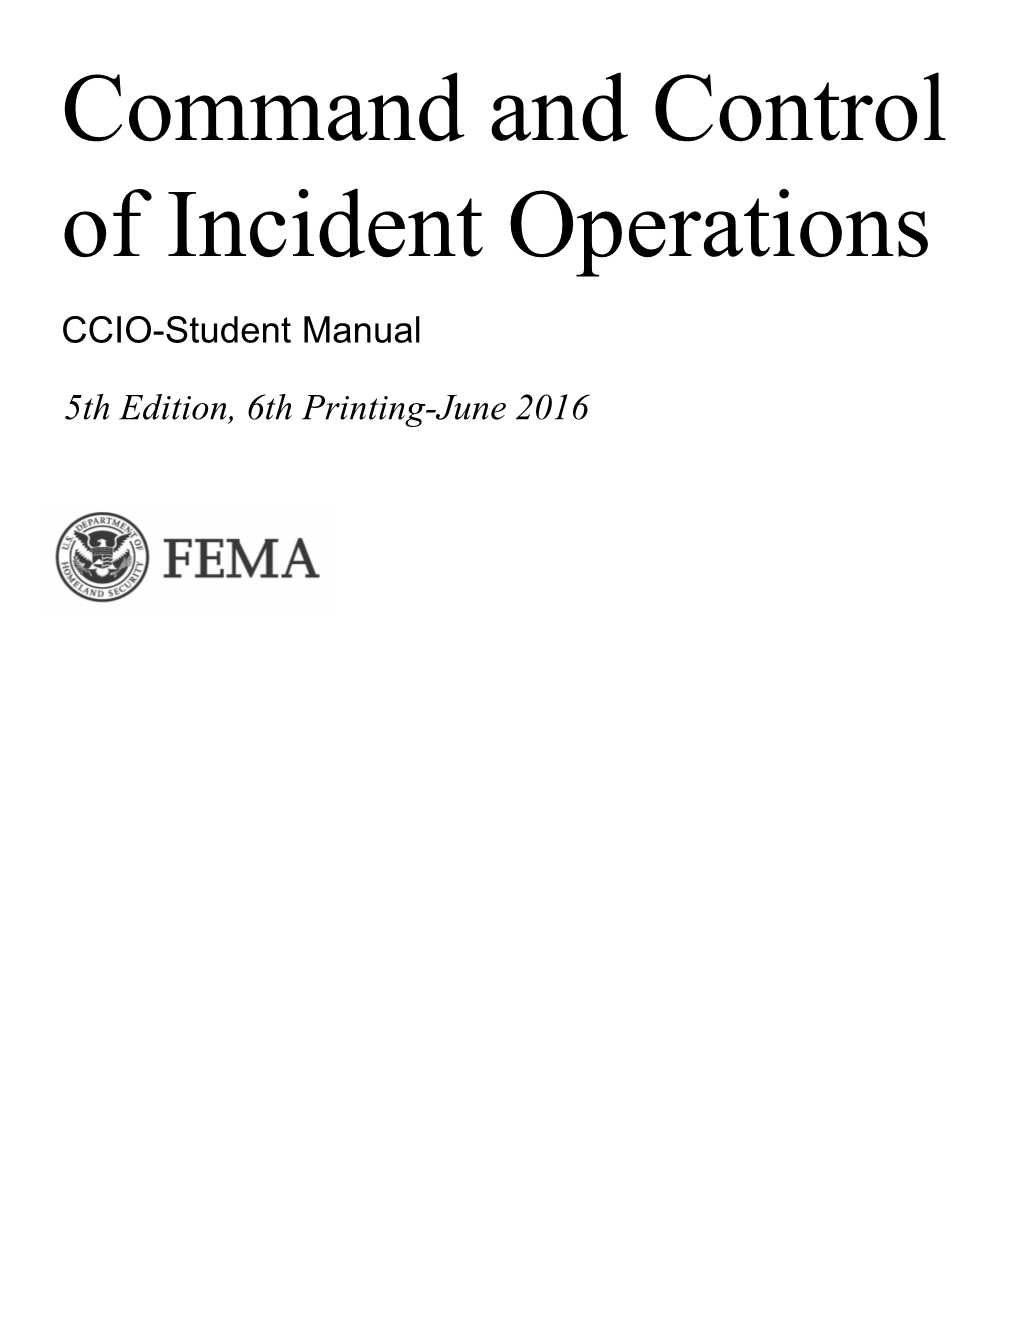 Command and Control of Incident Operations-Student Manual